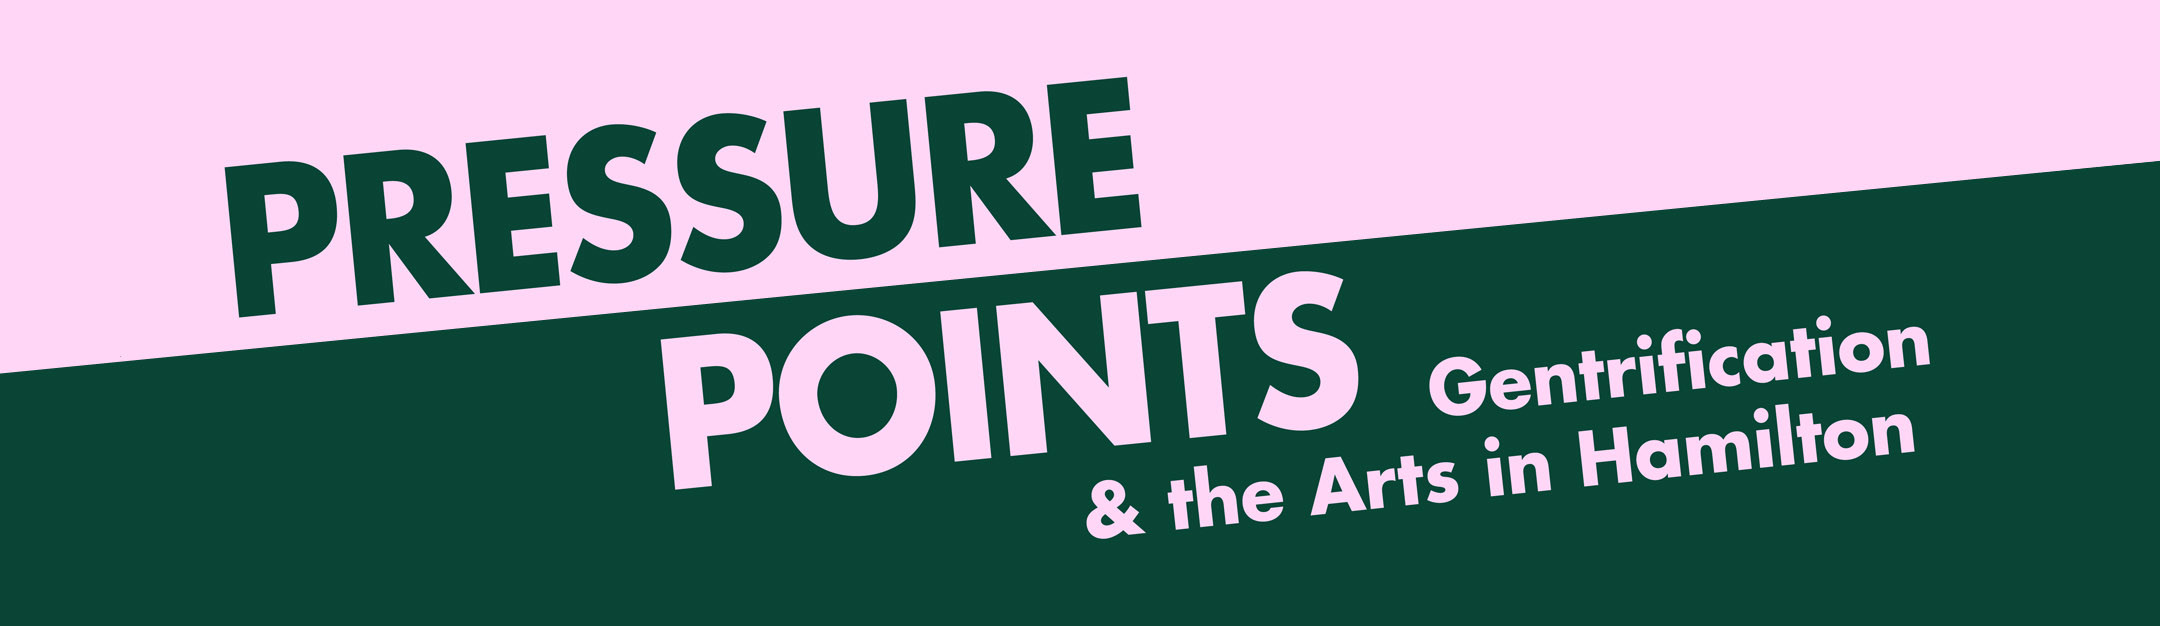 A light pink and forest green banner graphic, with serif font that says “Pressure Points” in capital letters. There is a subtitle that says: “Gentrification & The Arts in Hamilton.”